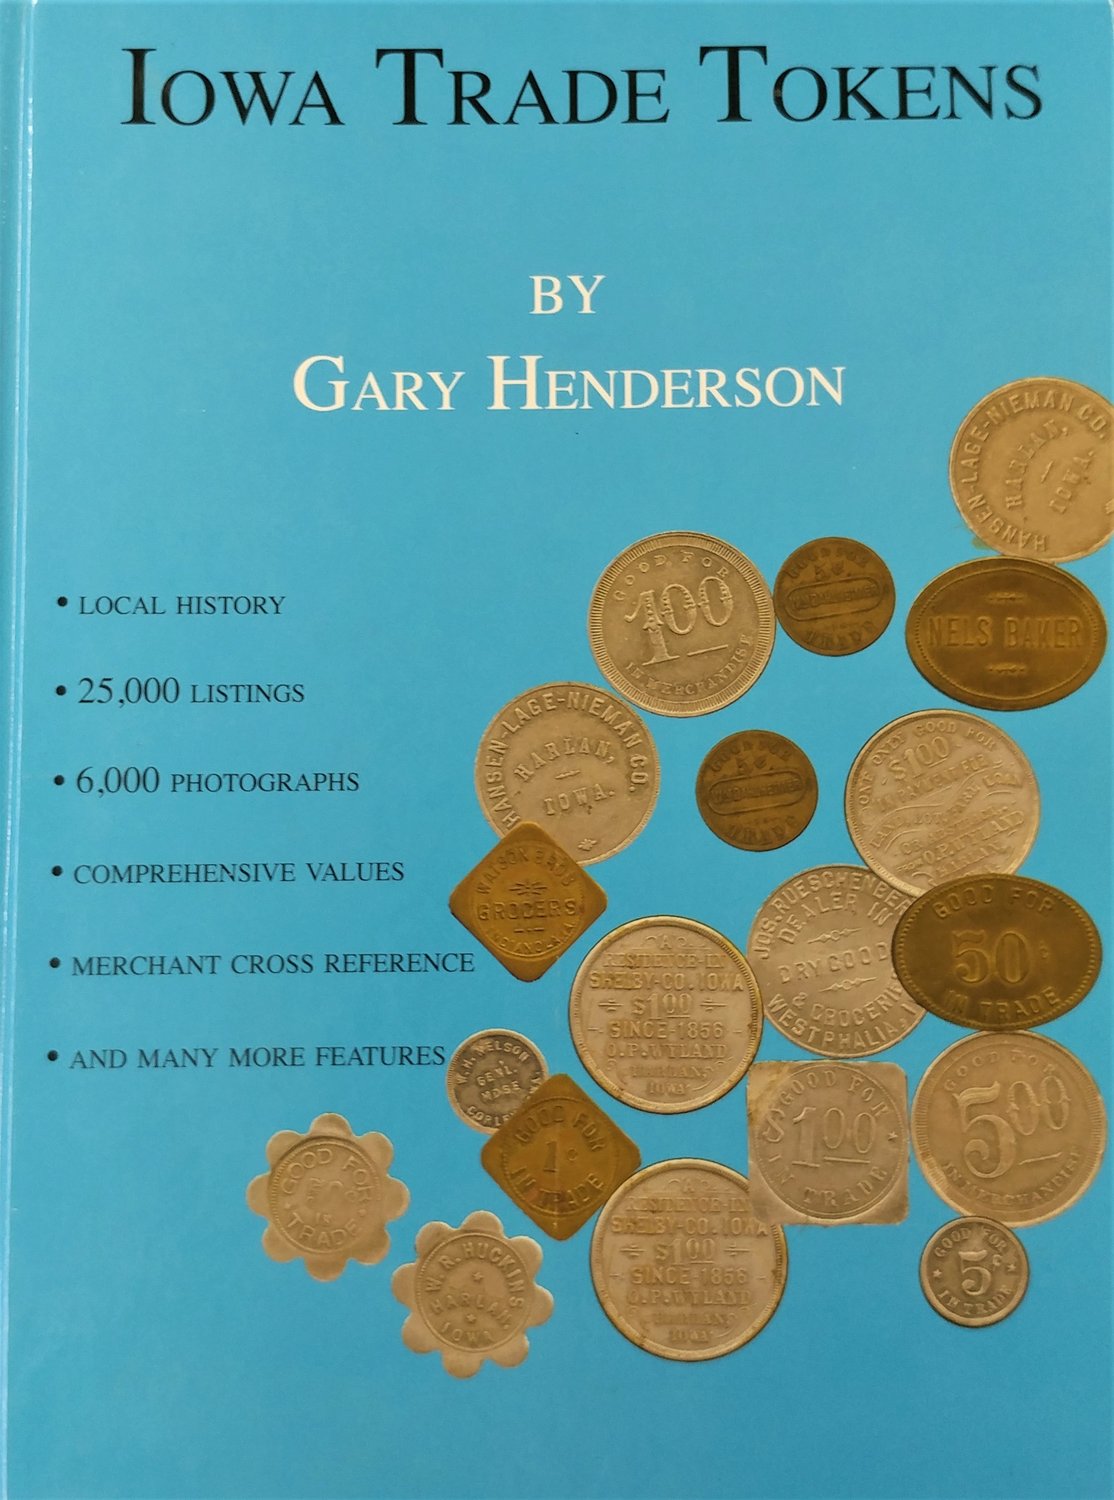 “Iowa Trade Tokens” was written by Las Cruces Coins and Collectibles co-owner Gary Henderson.